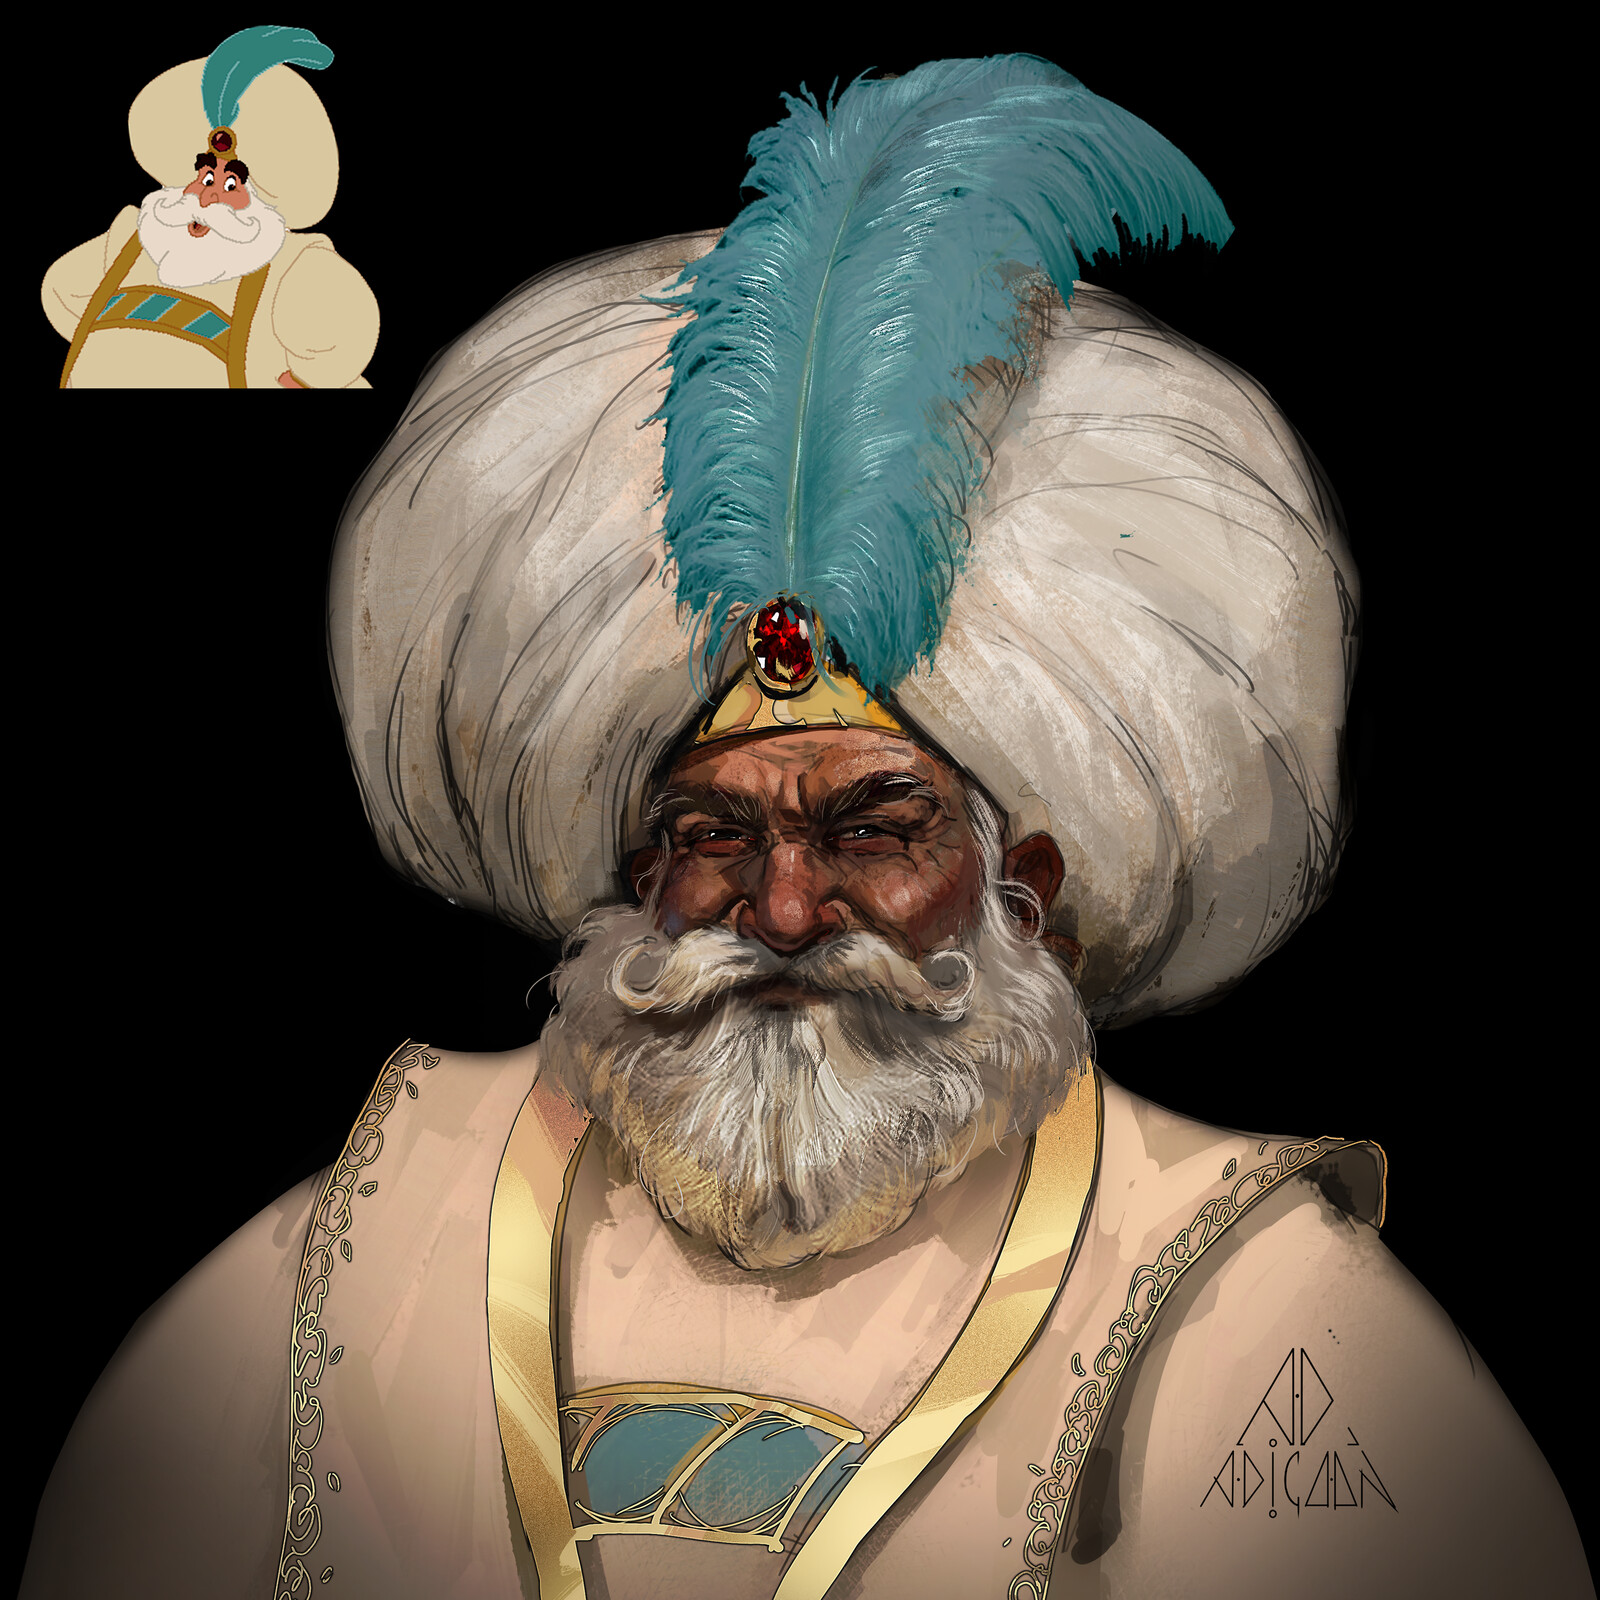 Redraw the Sultan of Agrabah